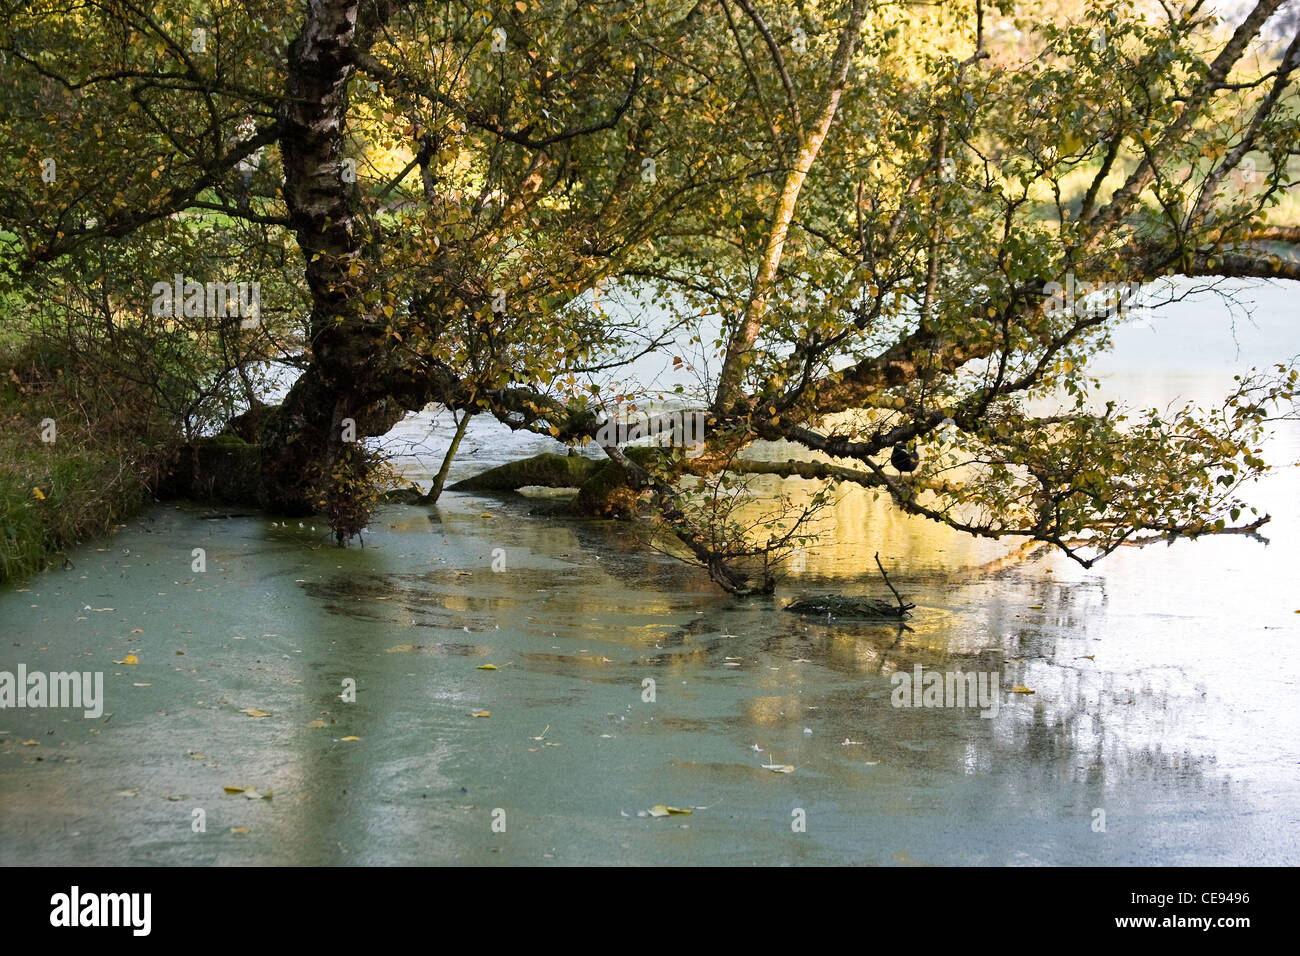 Old birch tree in autumn growing horizontal in water with duckweed on the water Stock Photo